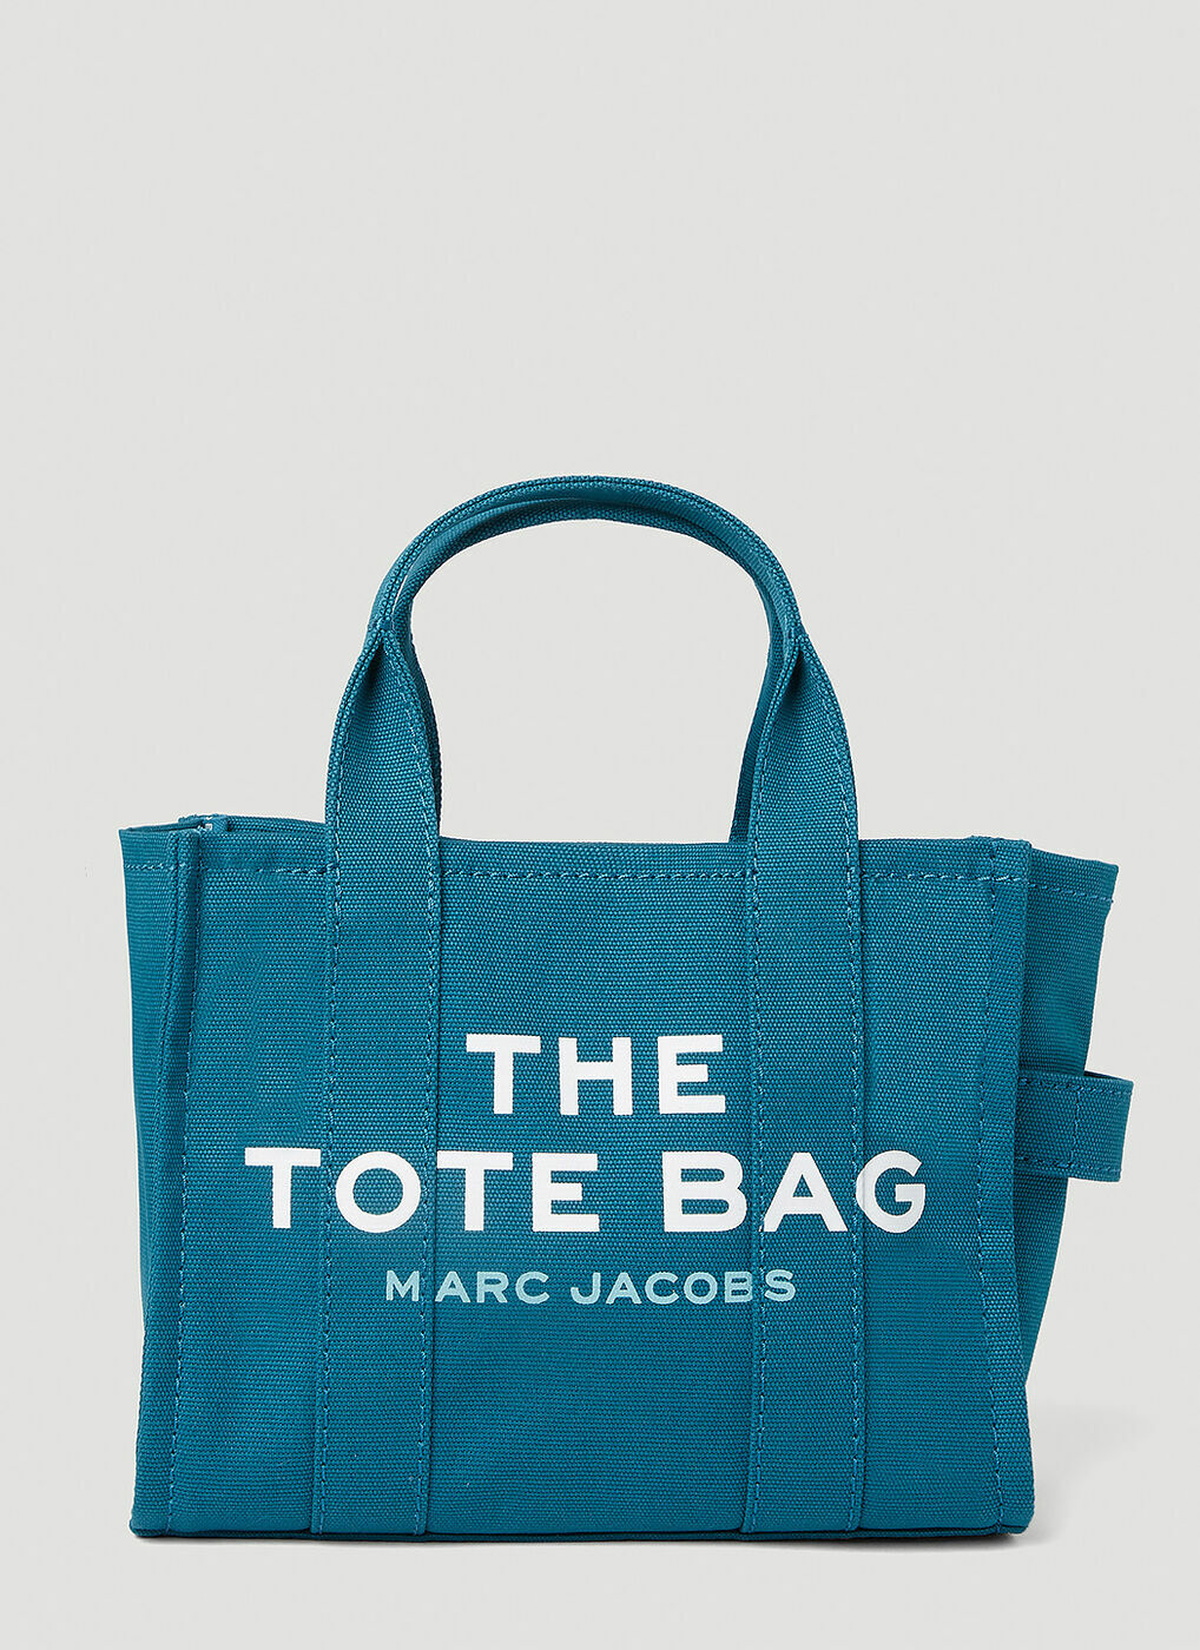 The Small Tote Bag of Marc Jacobs - Blue jean mini bag with shoulder strap  for women